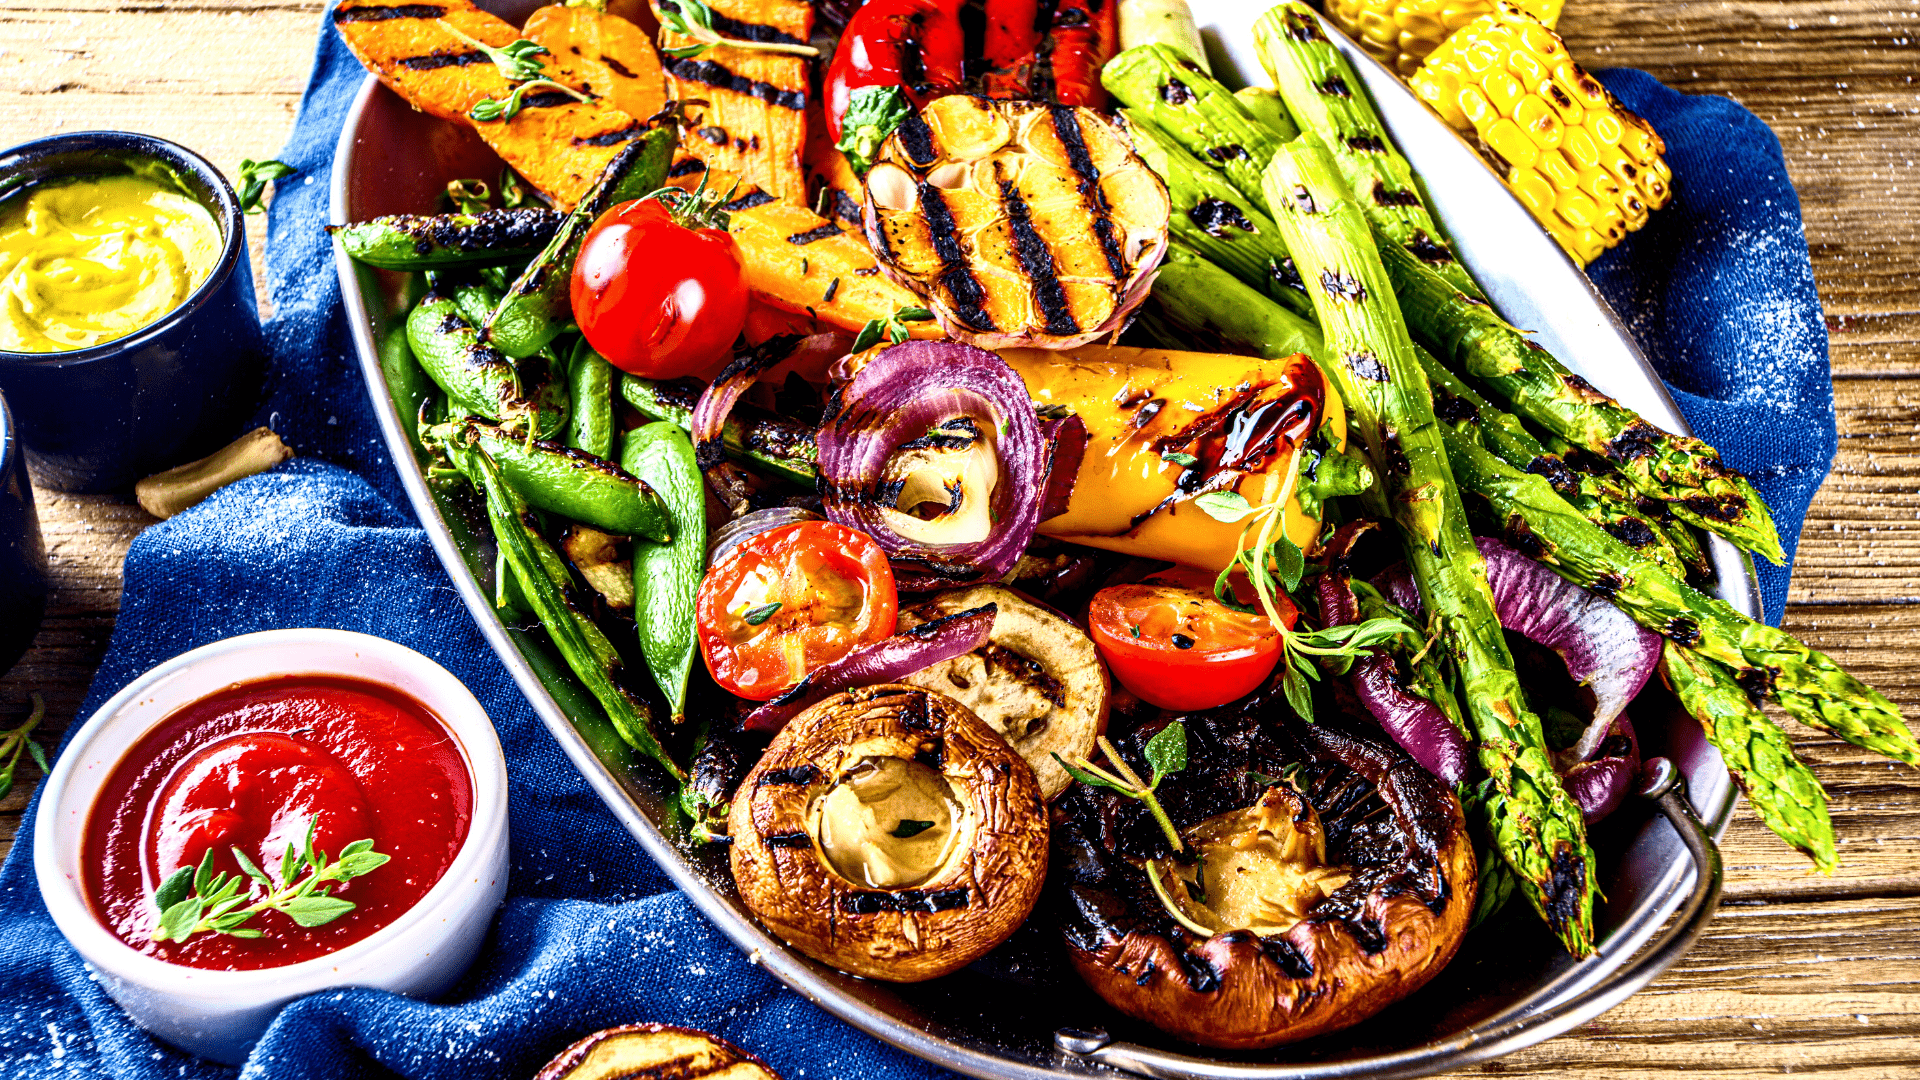 8 best recipes for smoked vegetables to use at your next barbecue